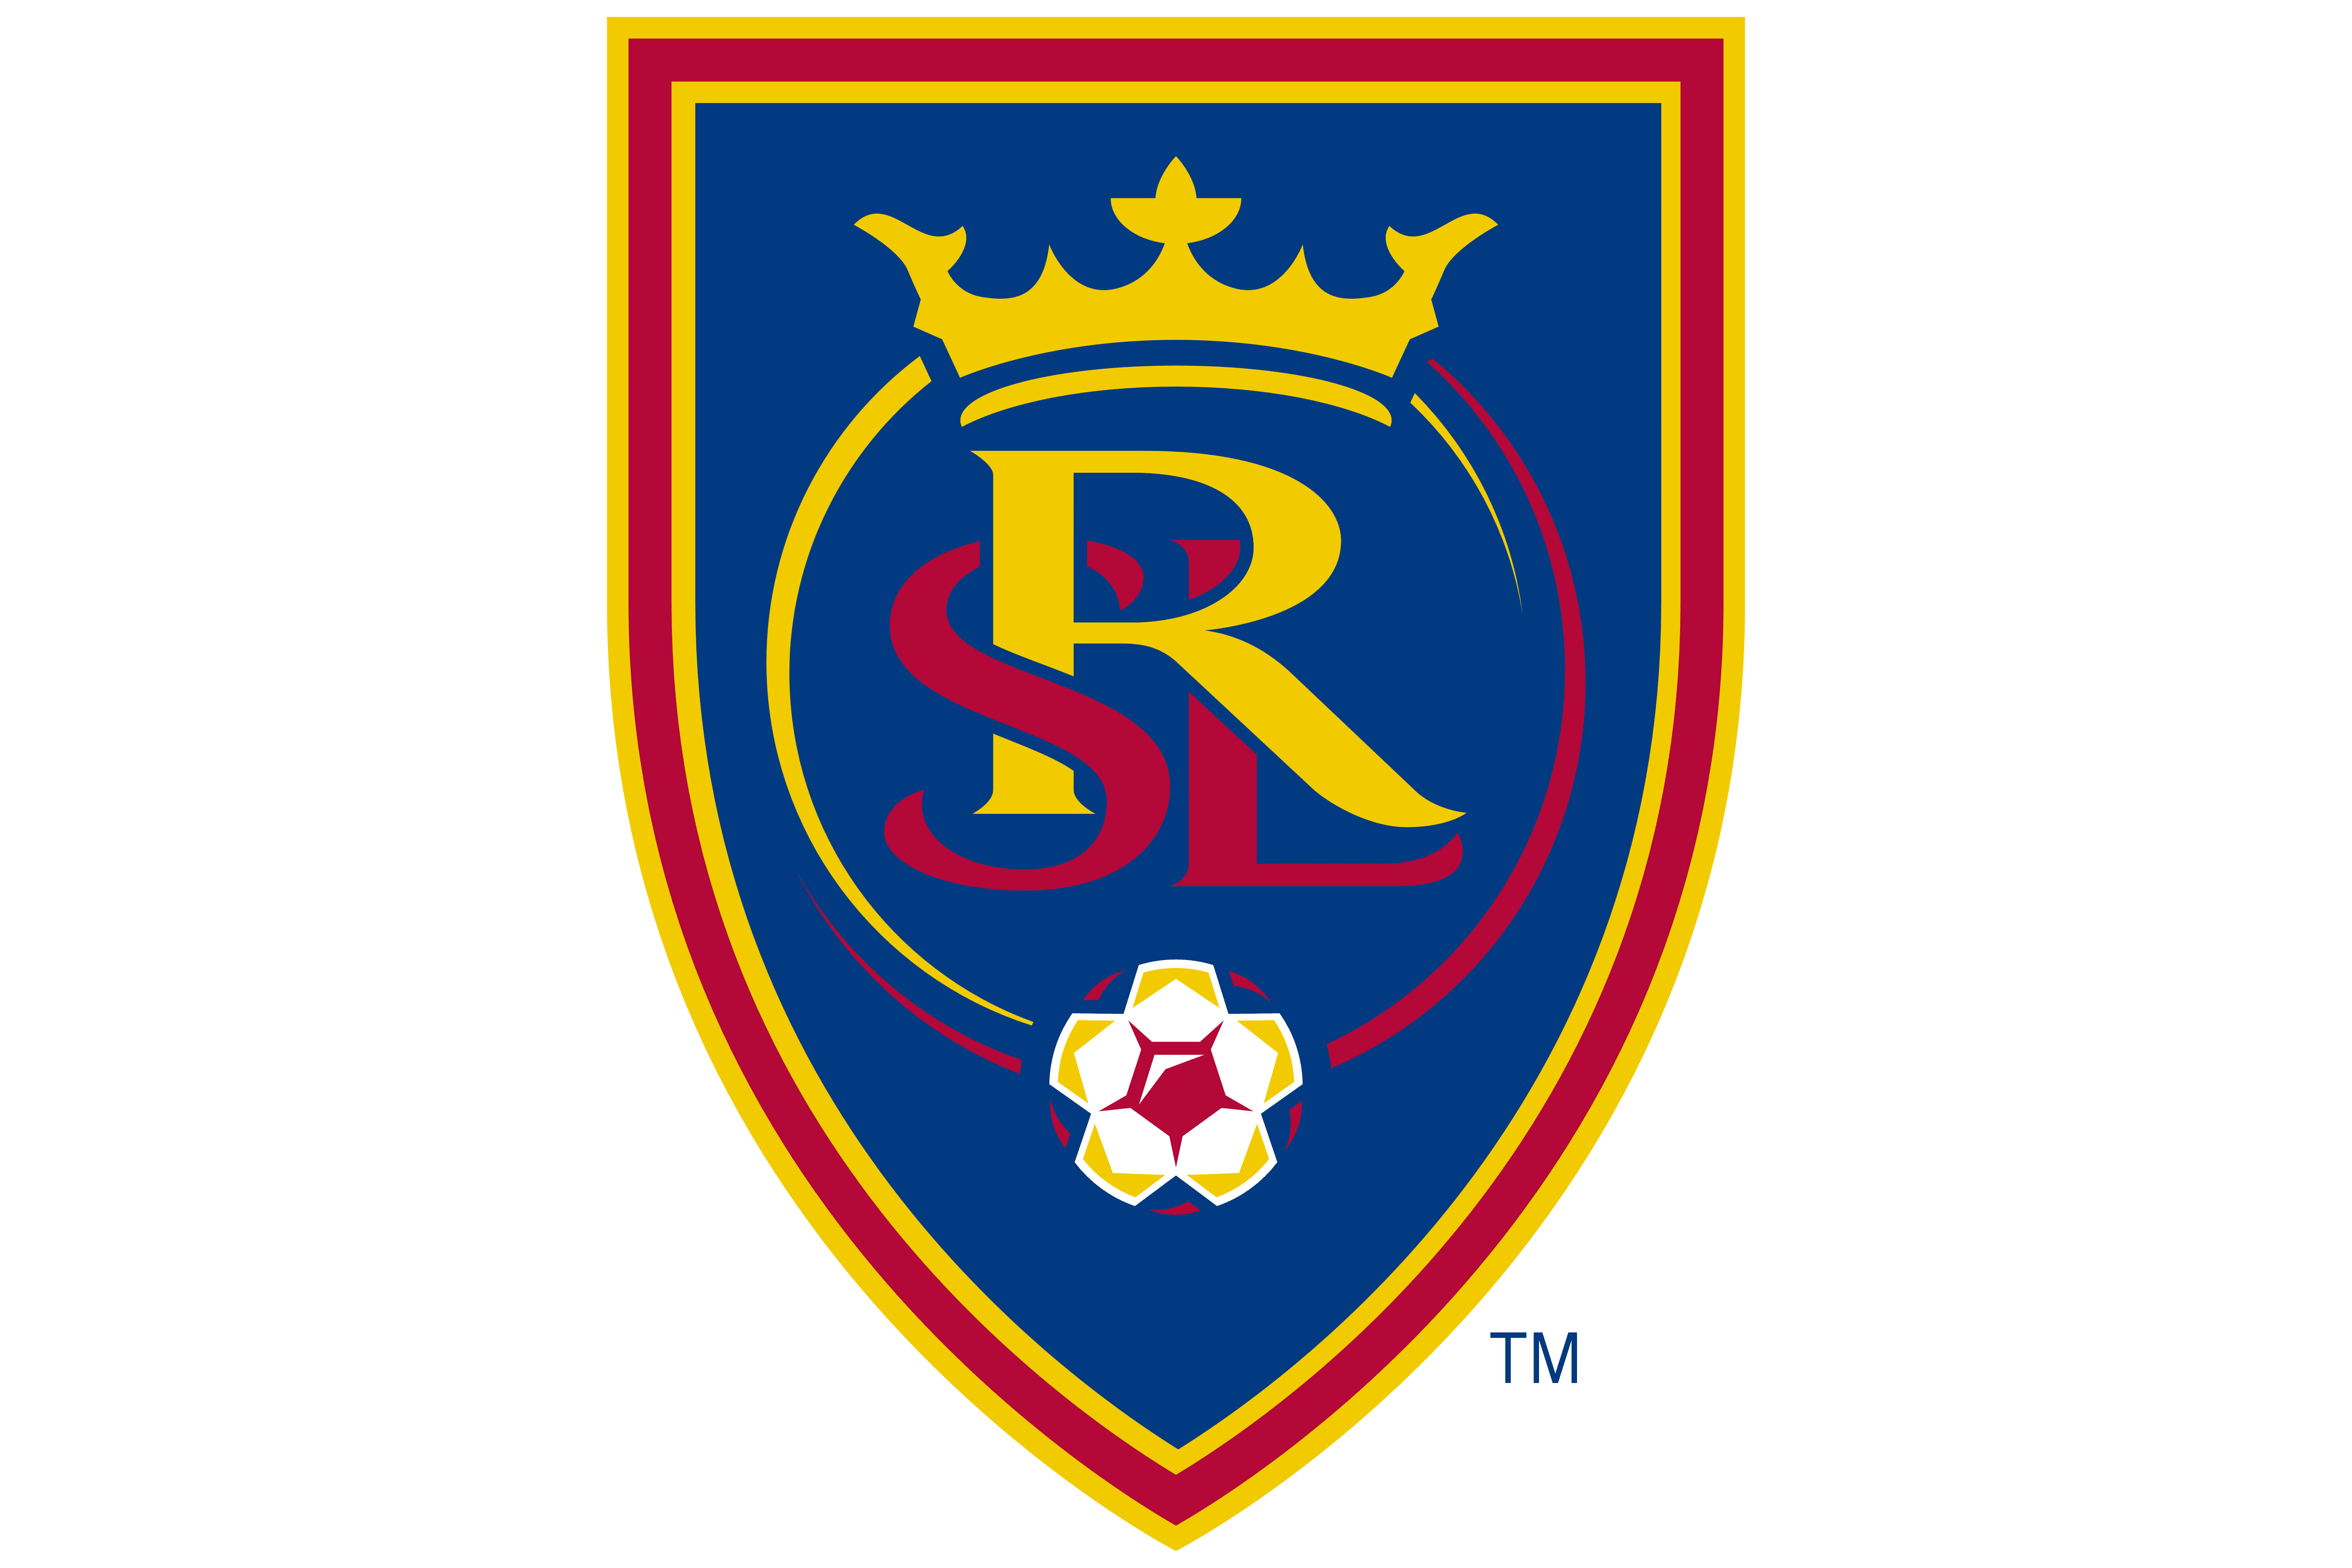 UYSA players get free RSL & URFC match tickets featured image